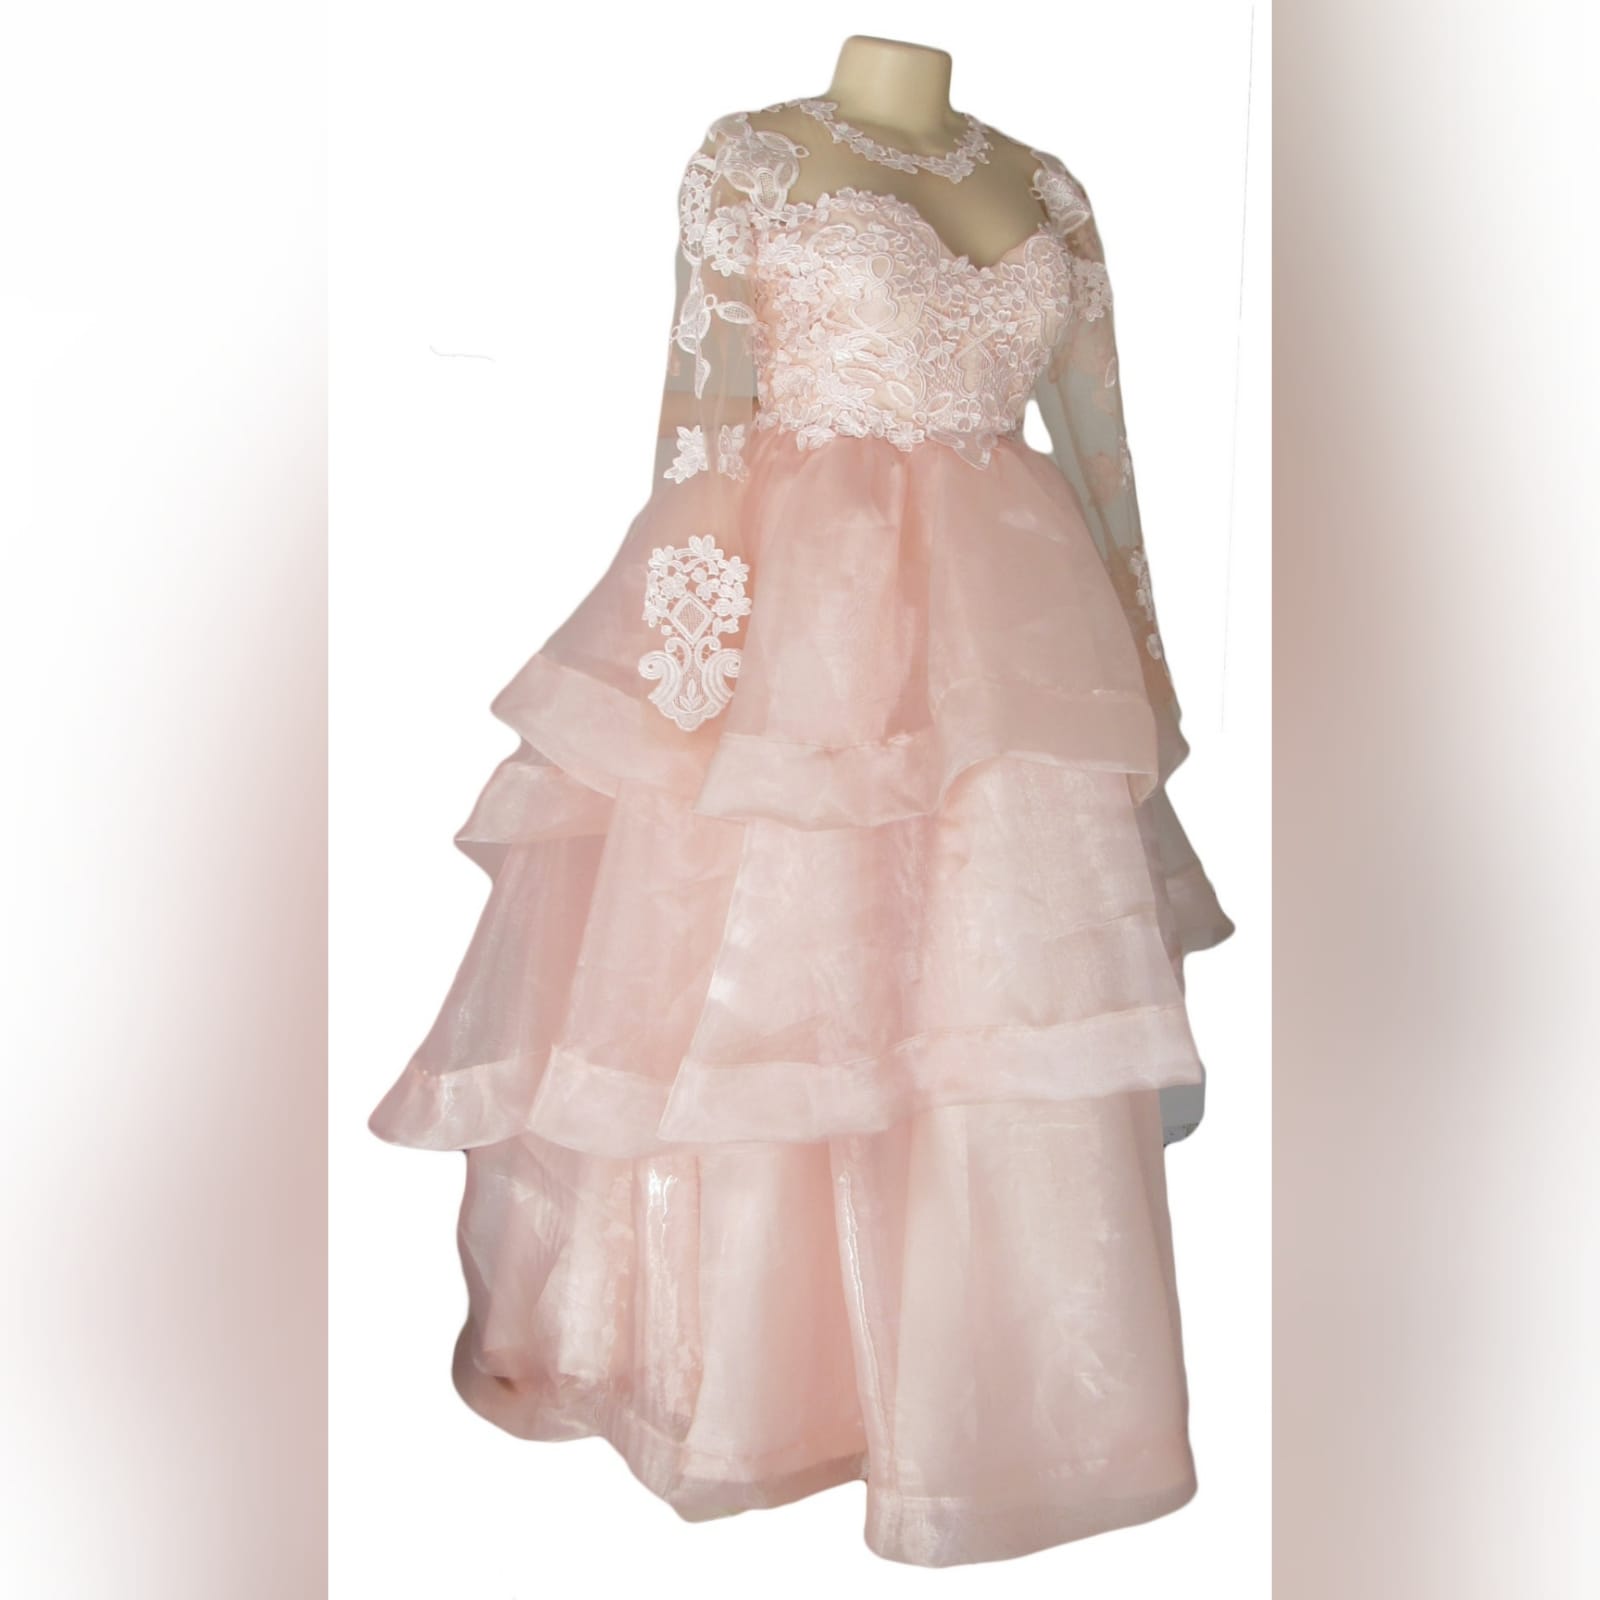 Baby pink long organza and lace prom ballgown 3 baby pink long organza and lace prom ballgown. This unique dress has a lace bodice with illusion neckline and sleeves and an open back. Bottom with a 3 layer organza design with a little train.